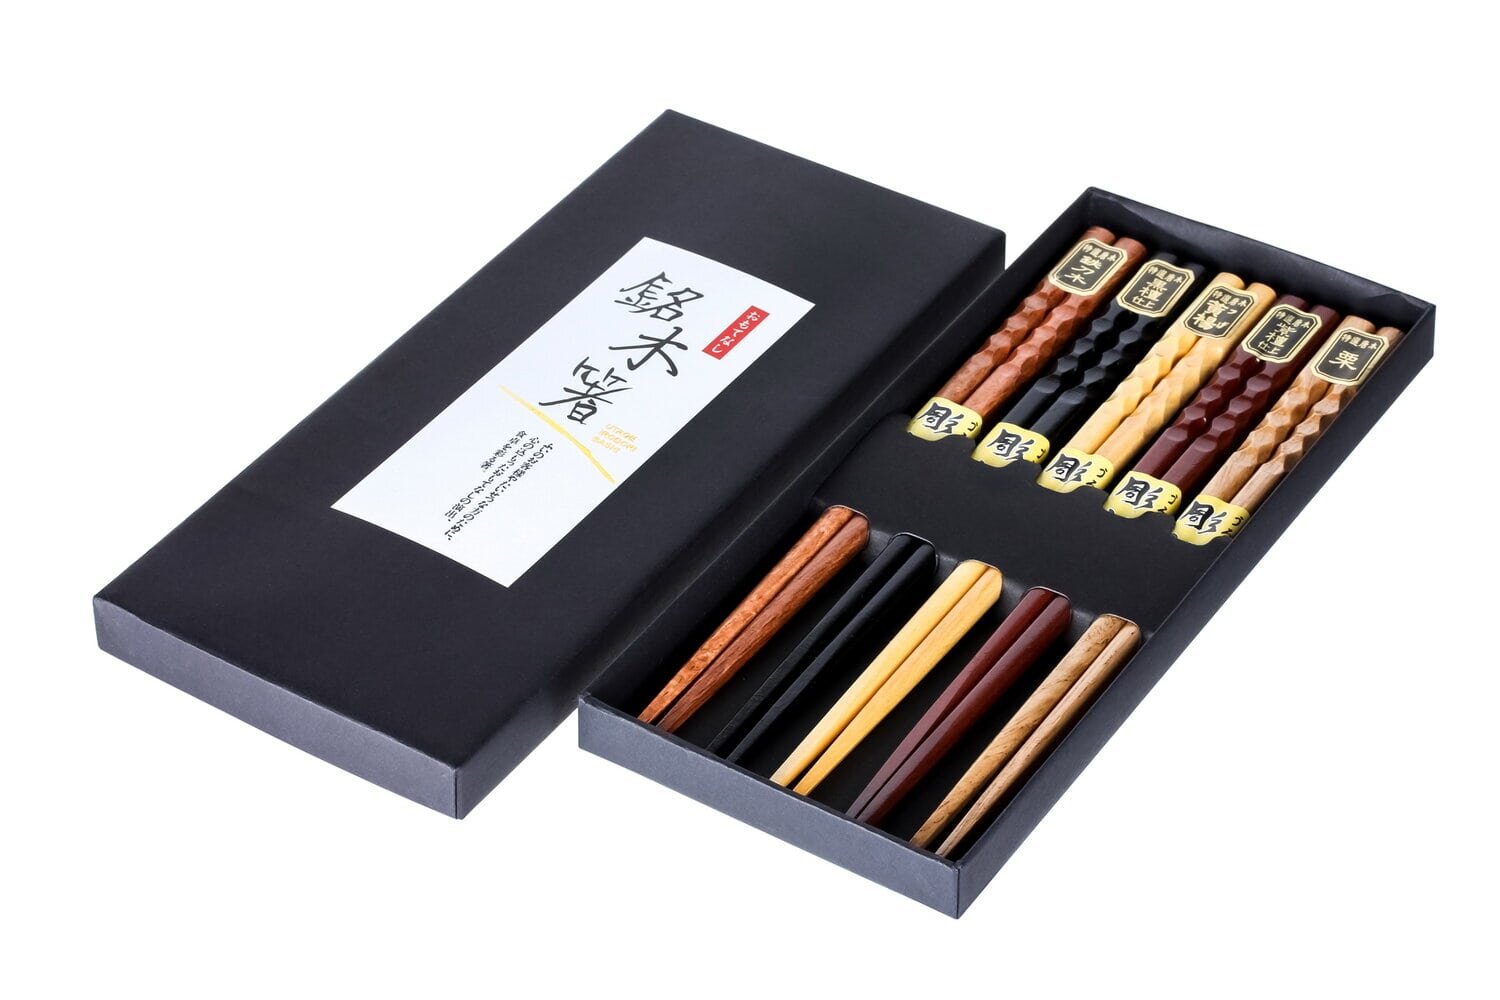  Wooden Chopsticks Reusable with Spoon Fork Chopsticks Wood Set Chop  Sticks Wooden Chopsticks Reusable Exquisite Chinese Chopsticks Gift for  Kids Beginners Black : Home & Kitchen